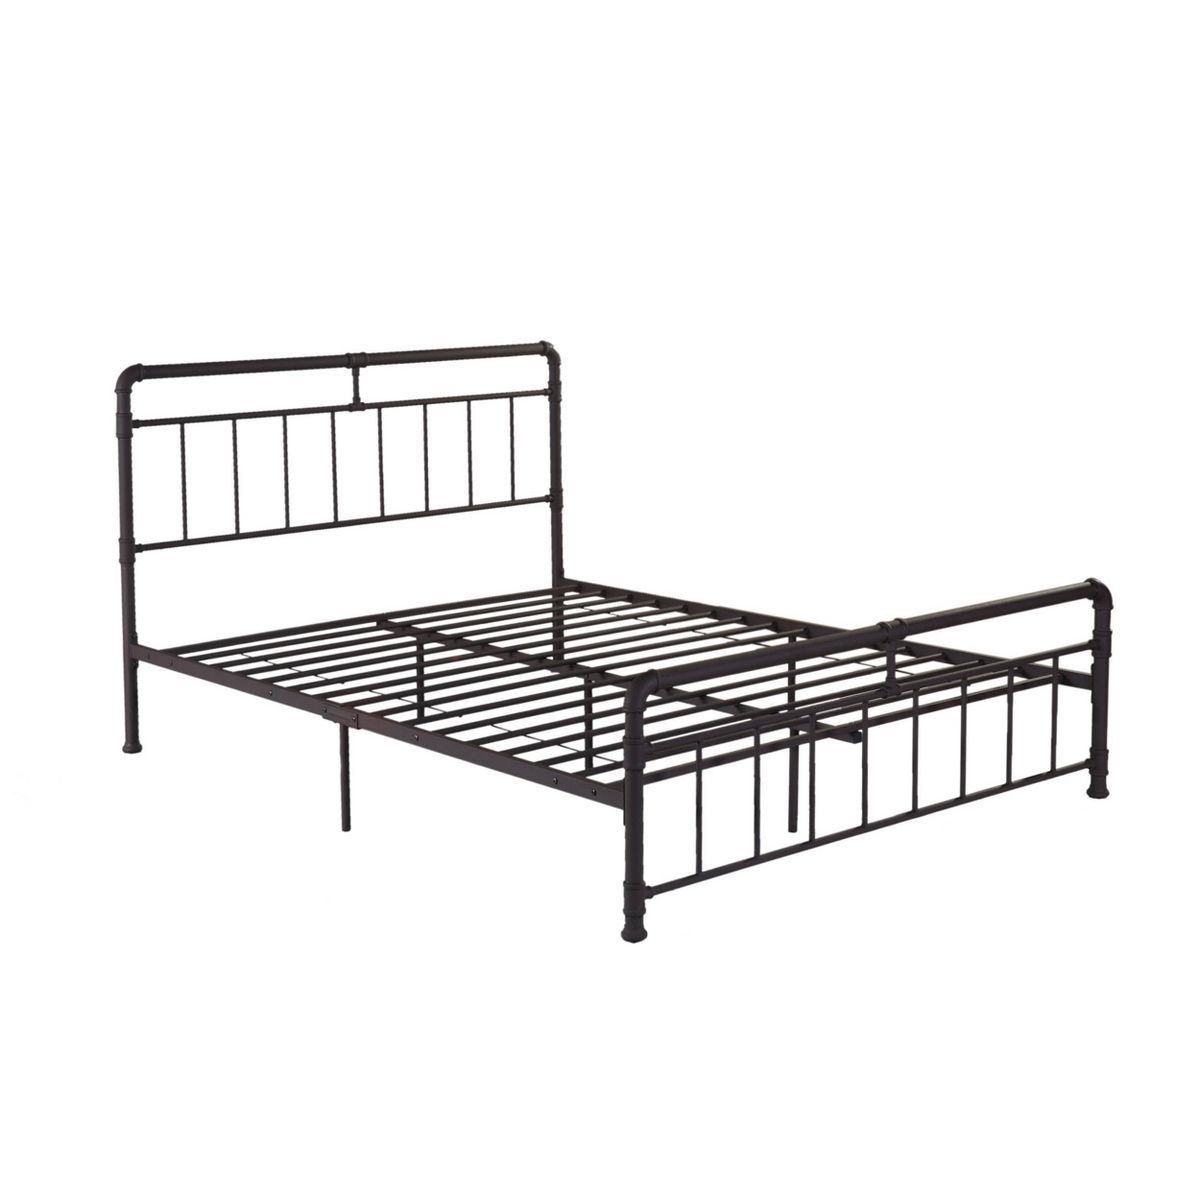 Mowry Industrial Iron Bed - Christopher Knight Home | Target